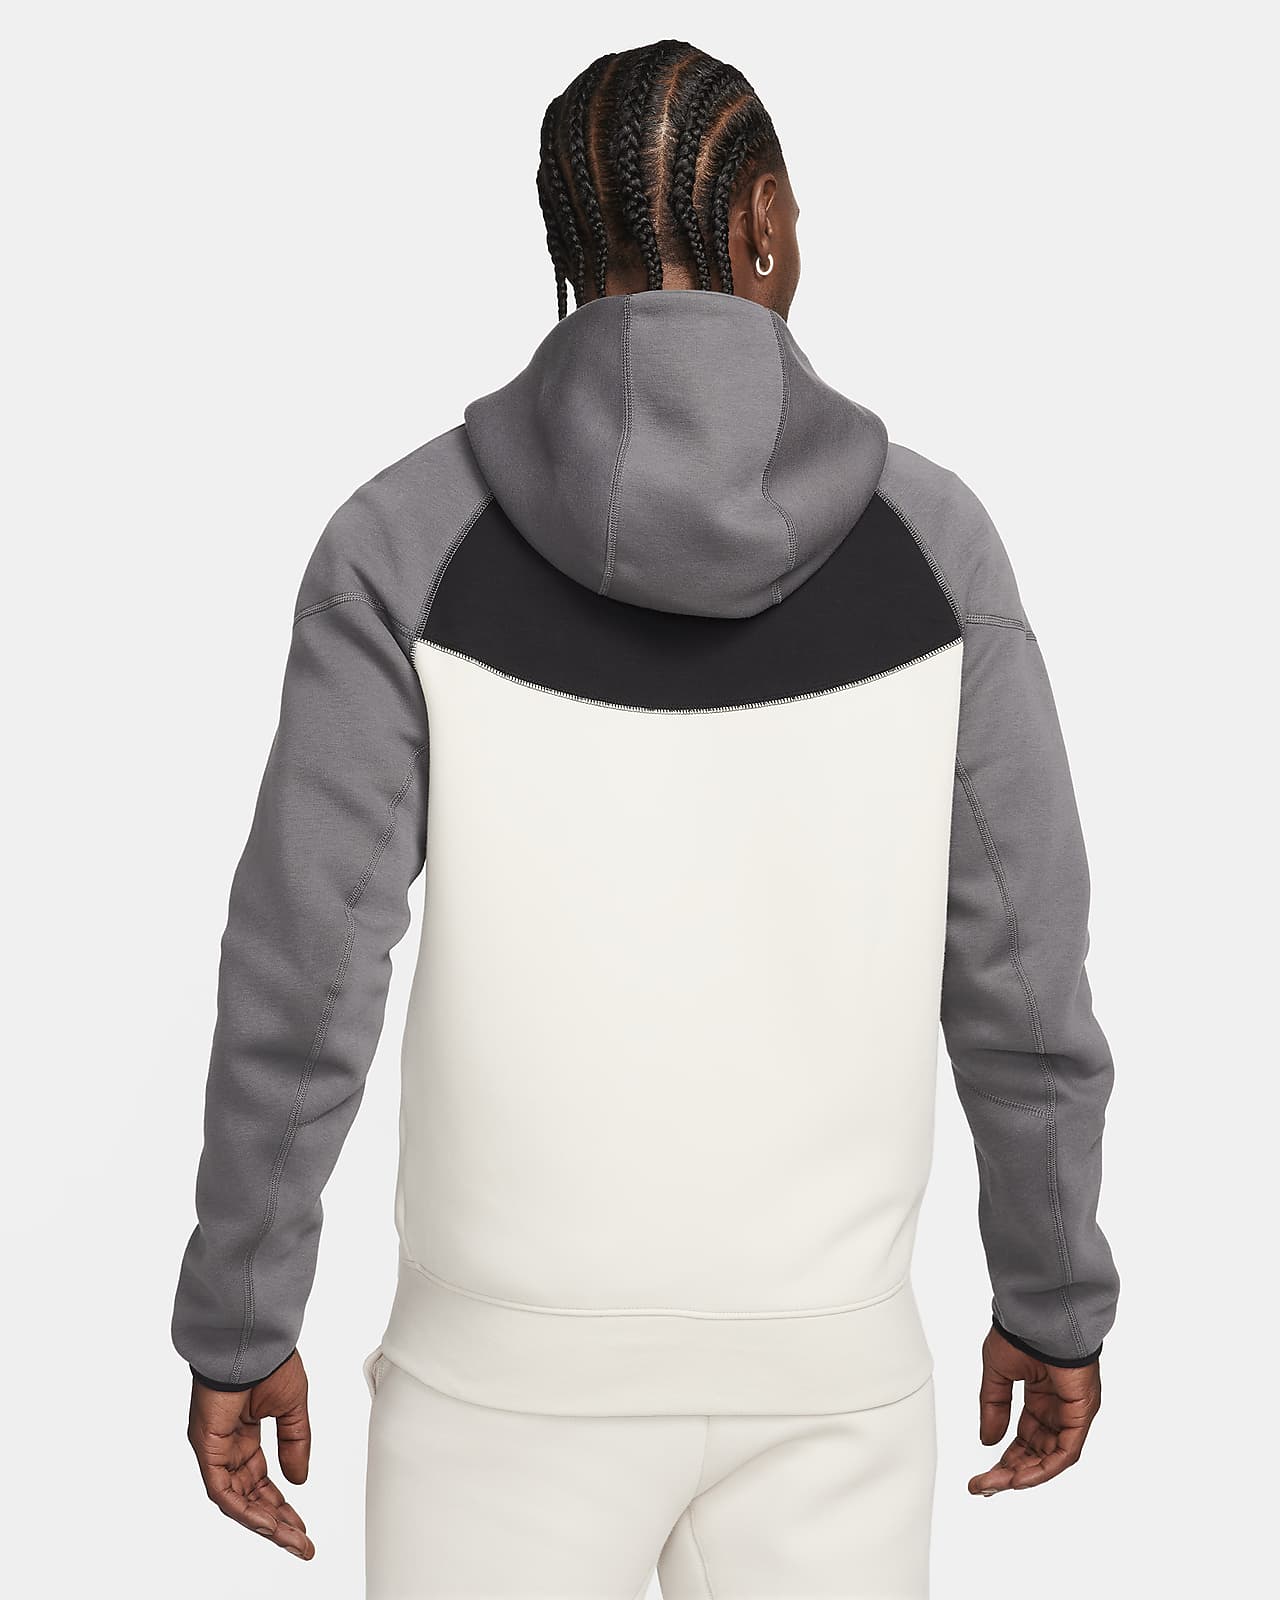 A4 Mens Tech Fleece Hoodie, Small, Graphite at  Men's Clothing store